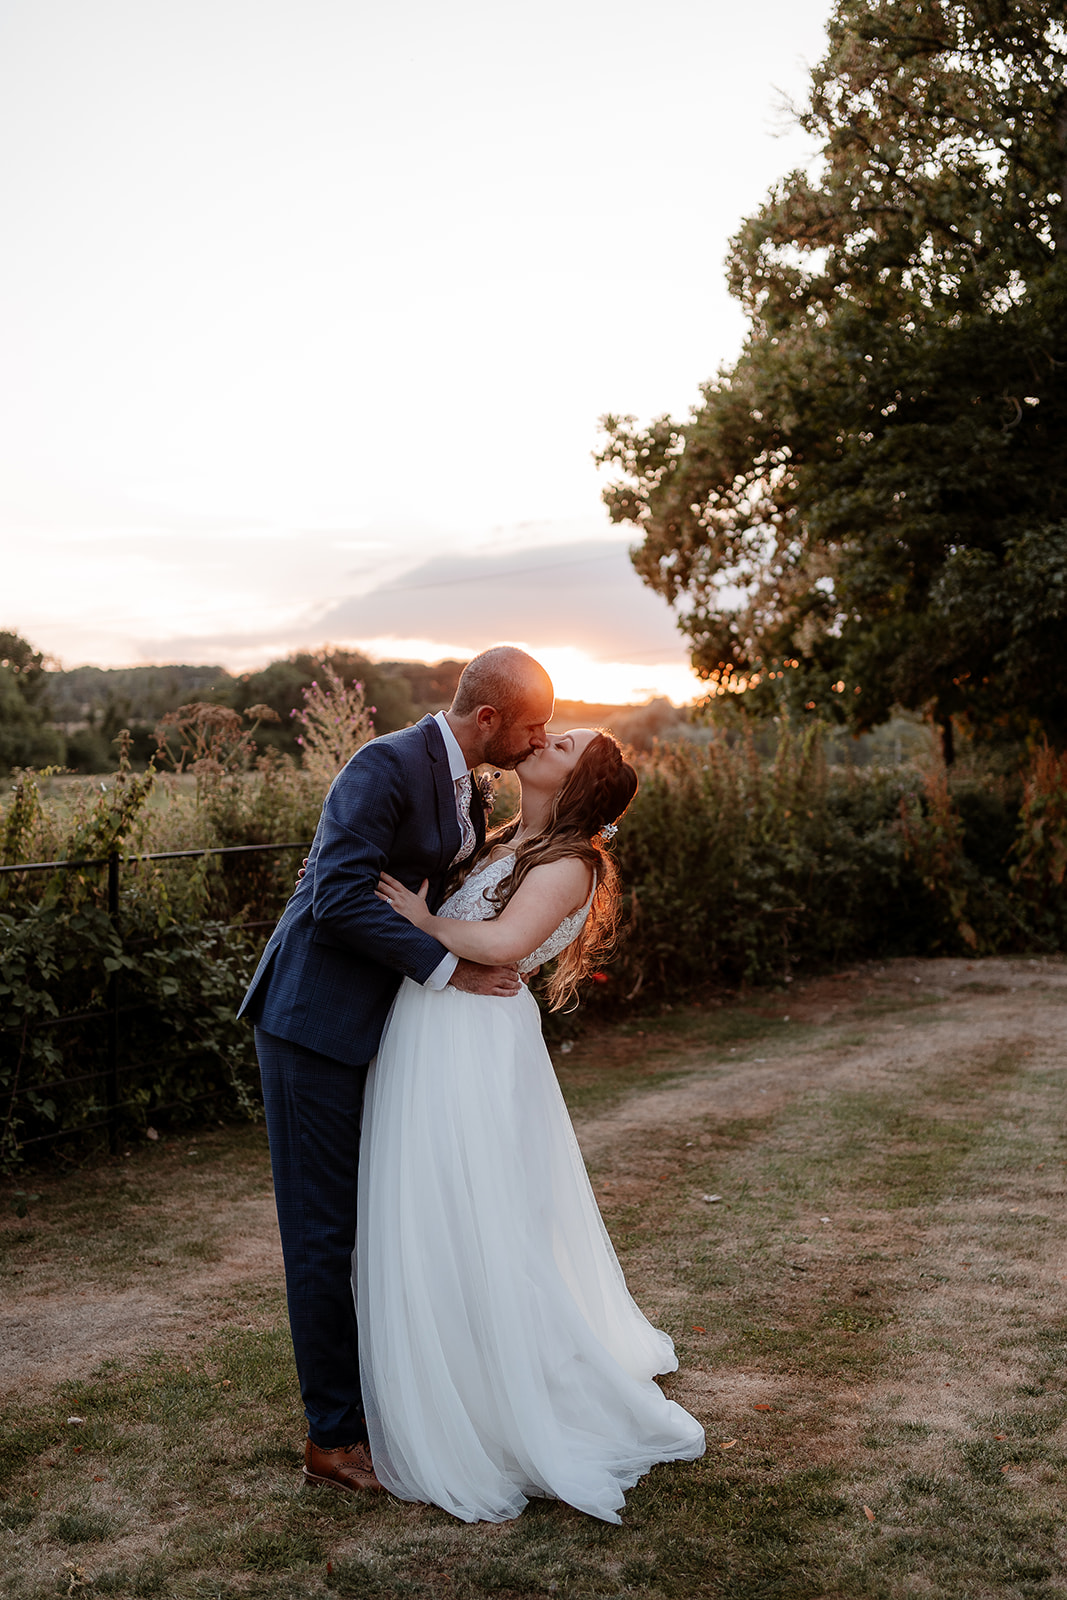 Golden hour couple photos at Syrencot wedding venue